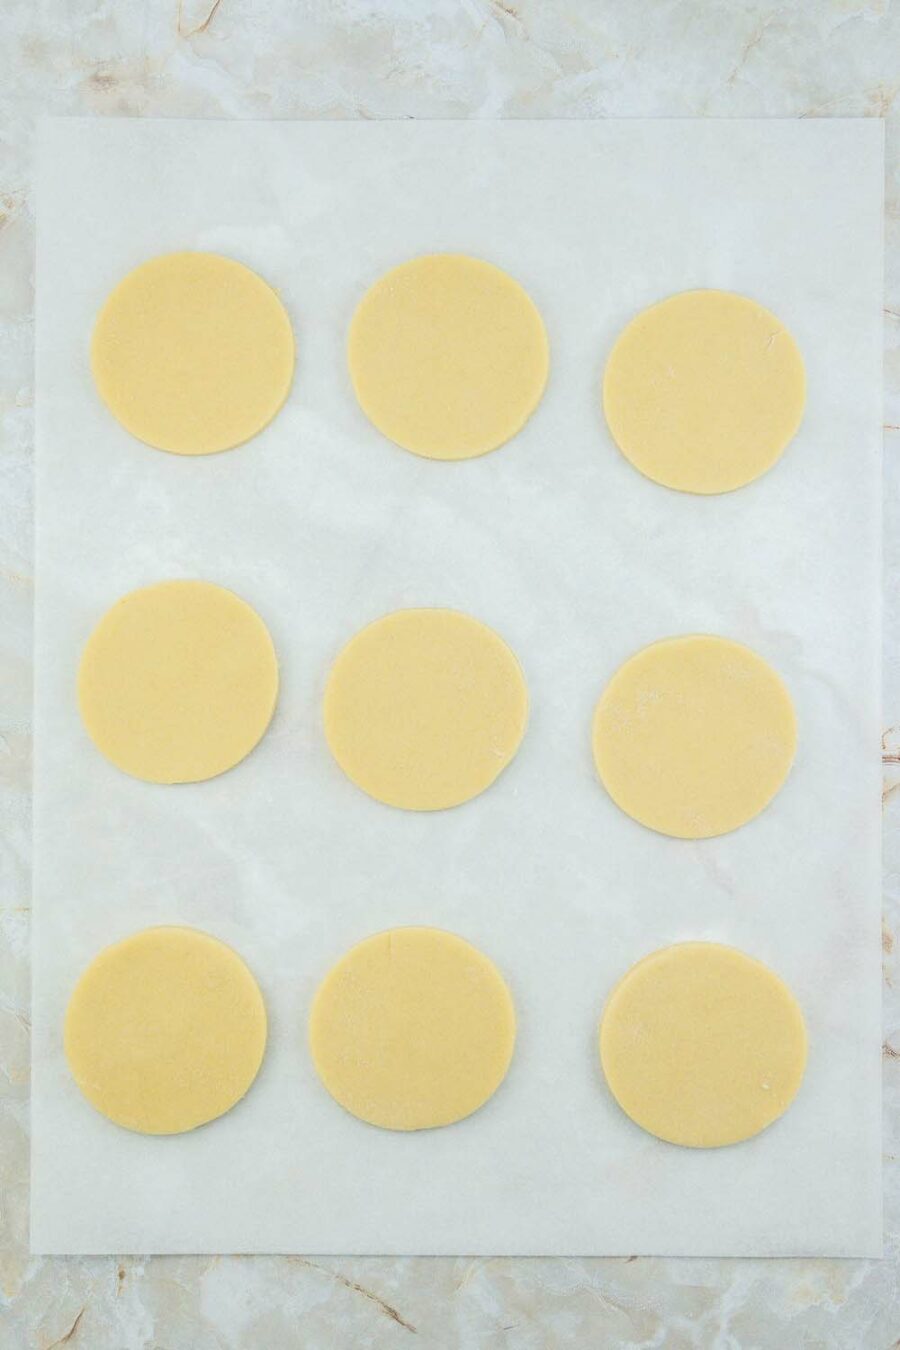 Cookie dough cut out with round cookie cutter